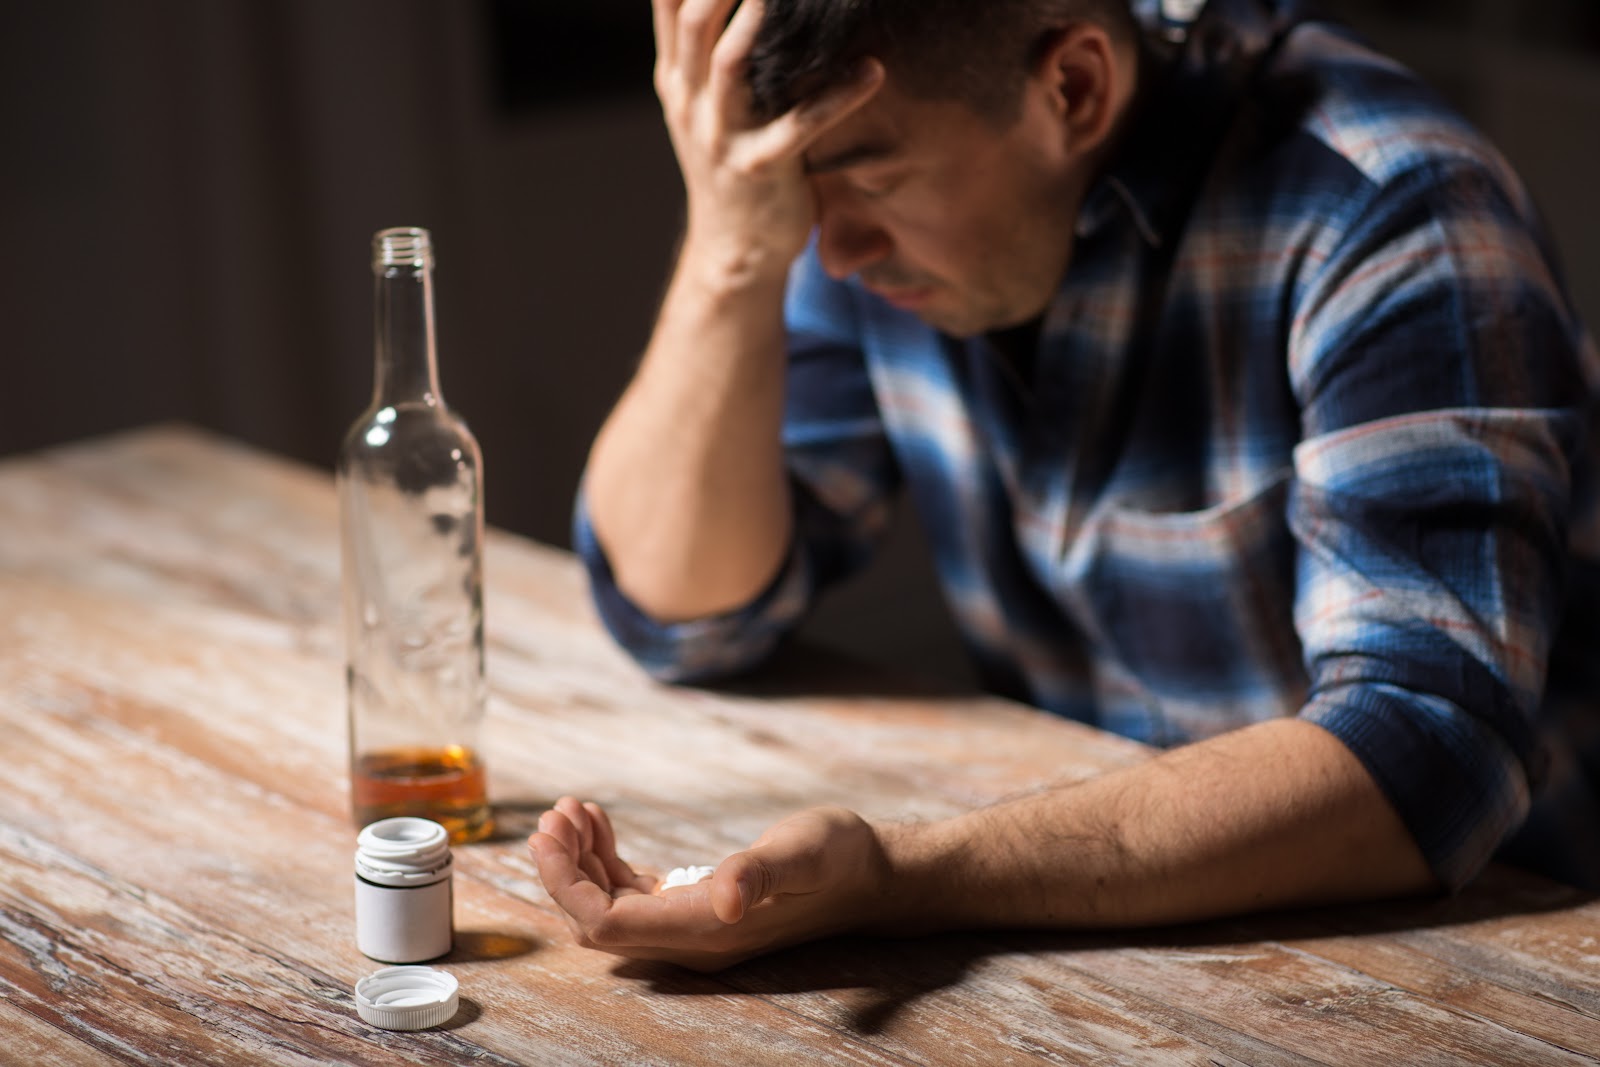 Dangers of mixing Xanax and Alcohol